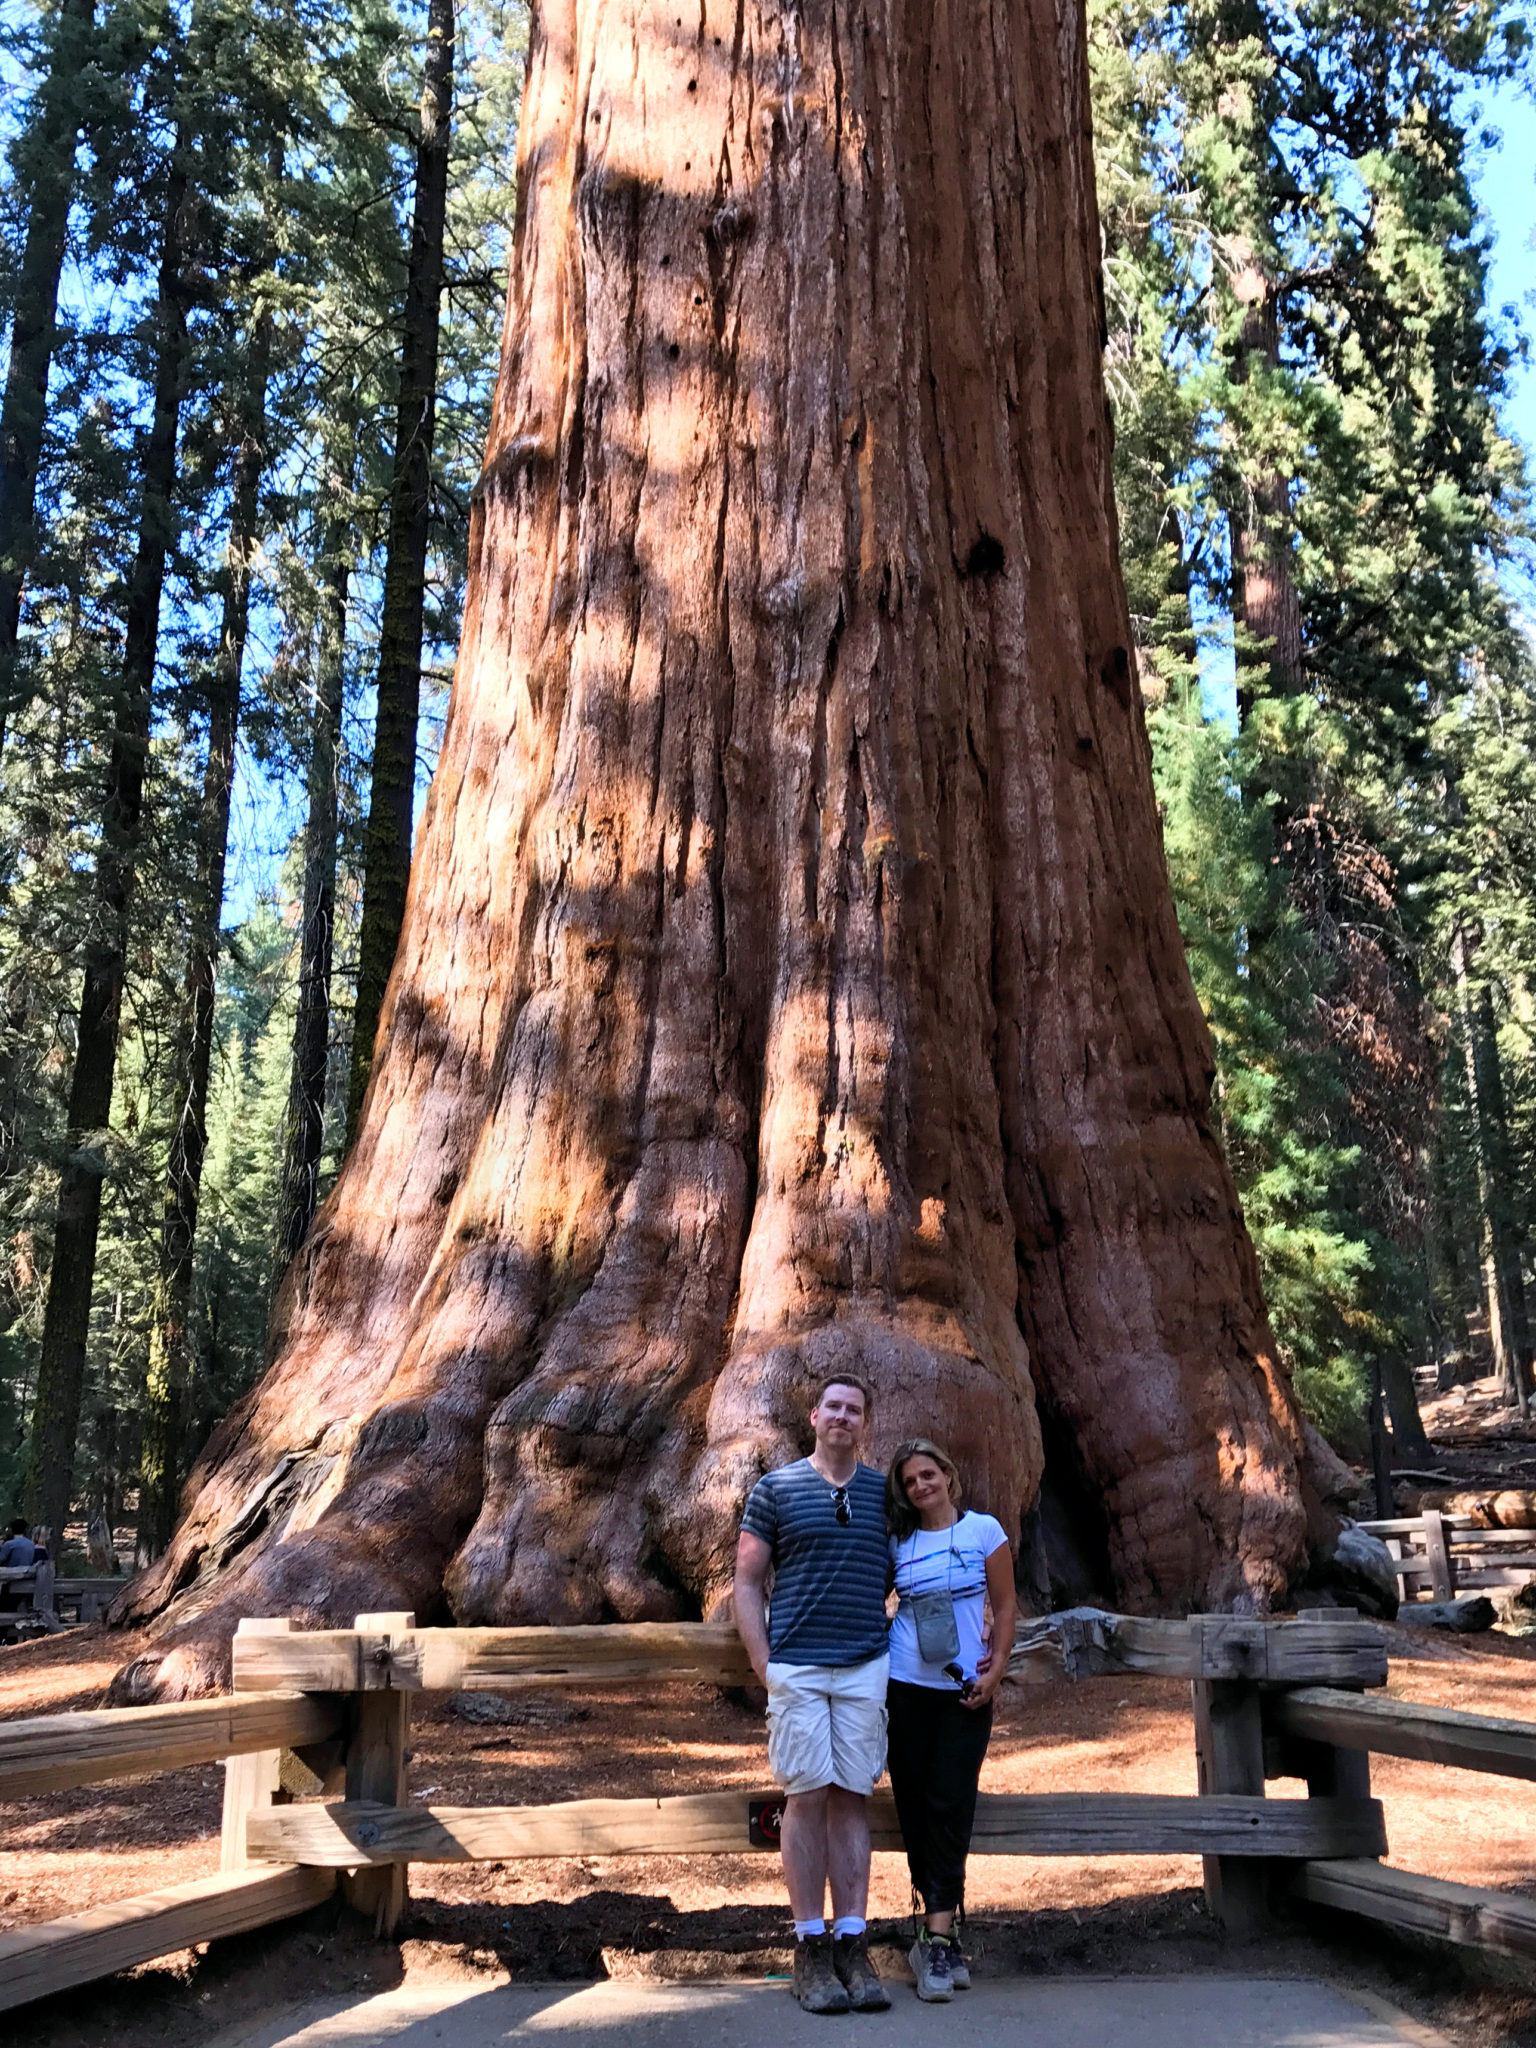 With General Sherman, the largest tree in the world by volume